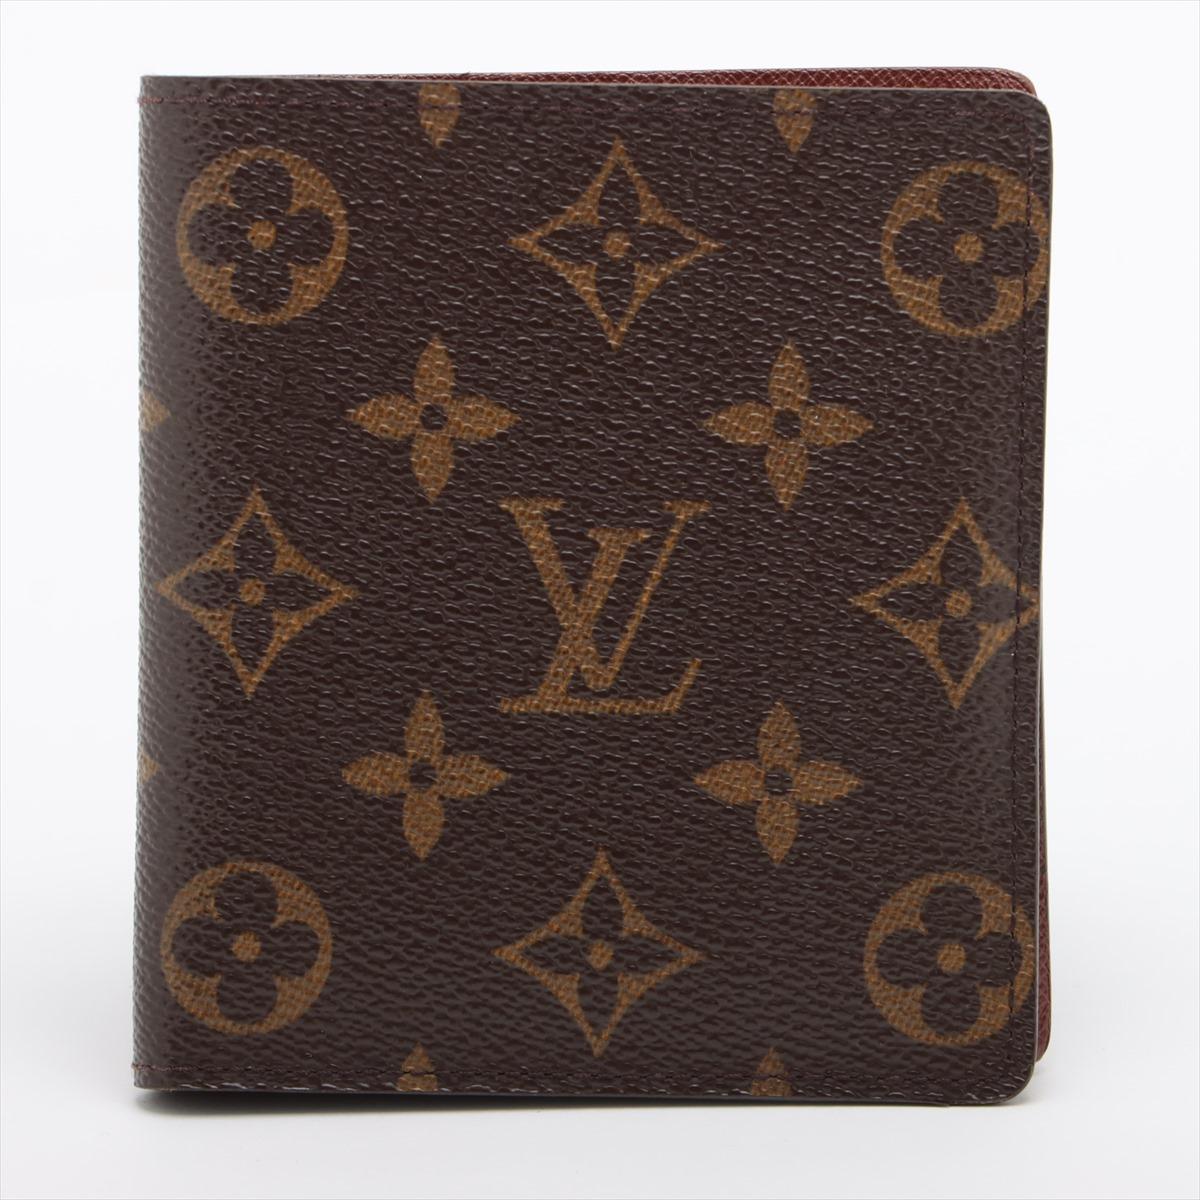 The Louis Vuitton Monogram Credit Holder Wallet is a sophisticated and functional accessory that embodies the luxury and craftsmanship synonymous with Louis Vuitton. The wallet features iconic Monogram canvas in a classic and timeless design. The